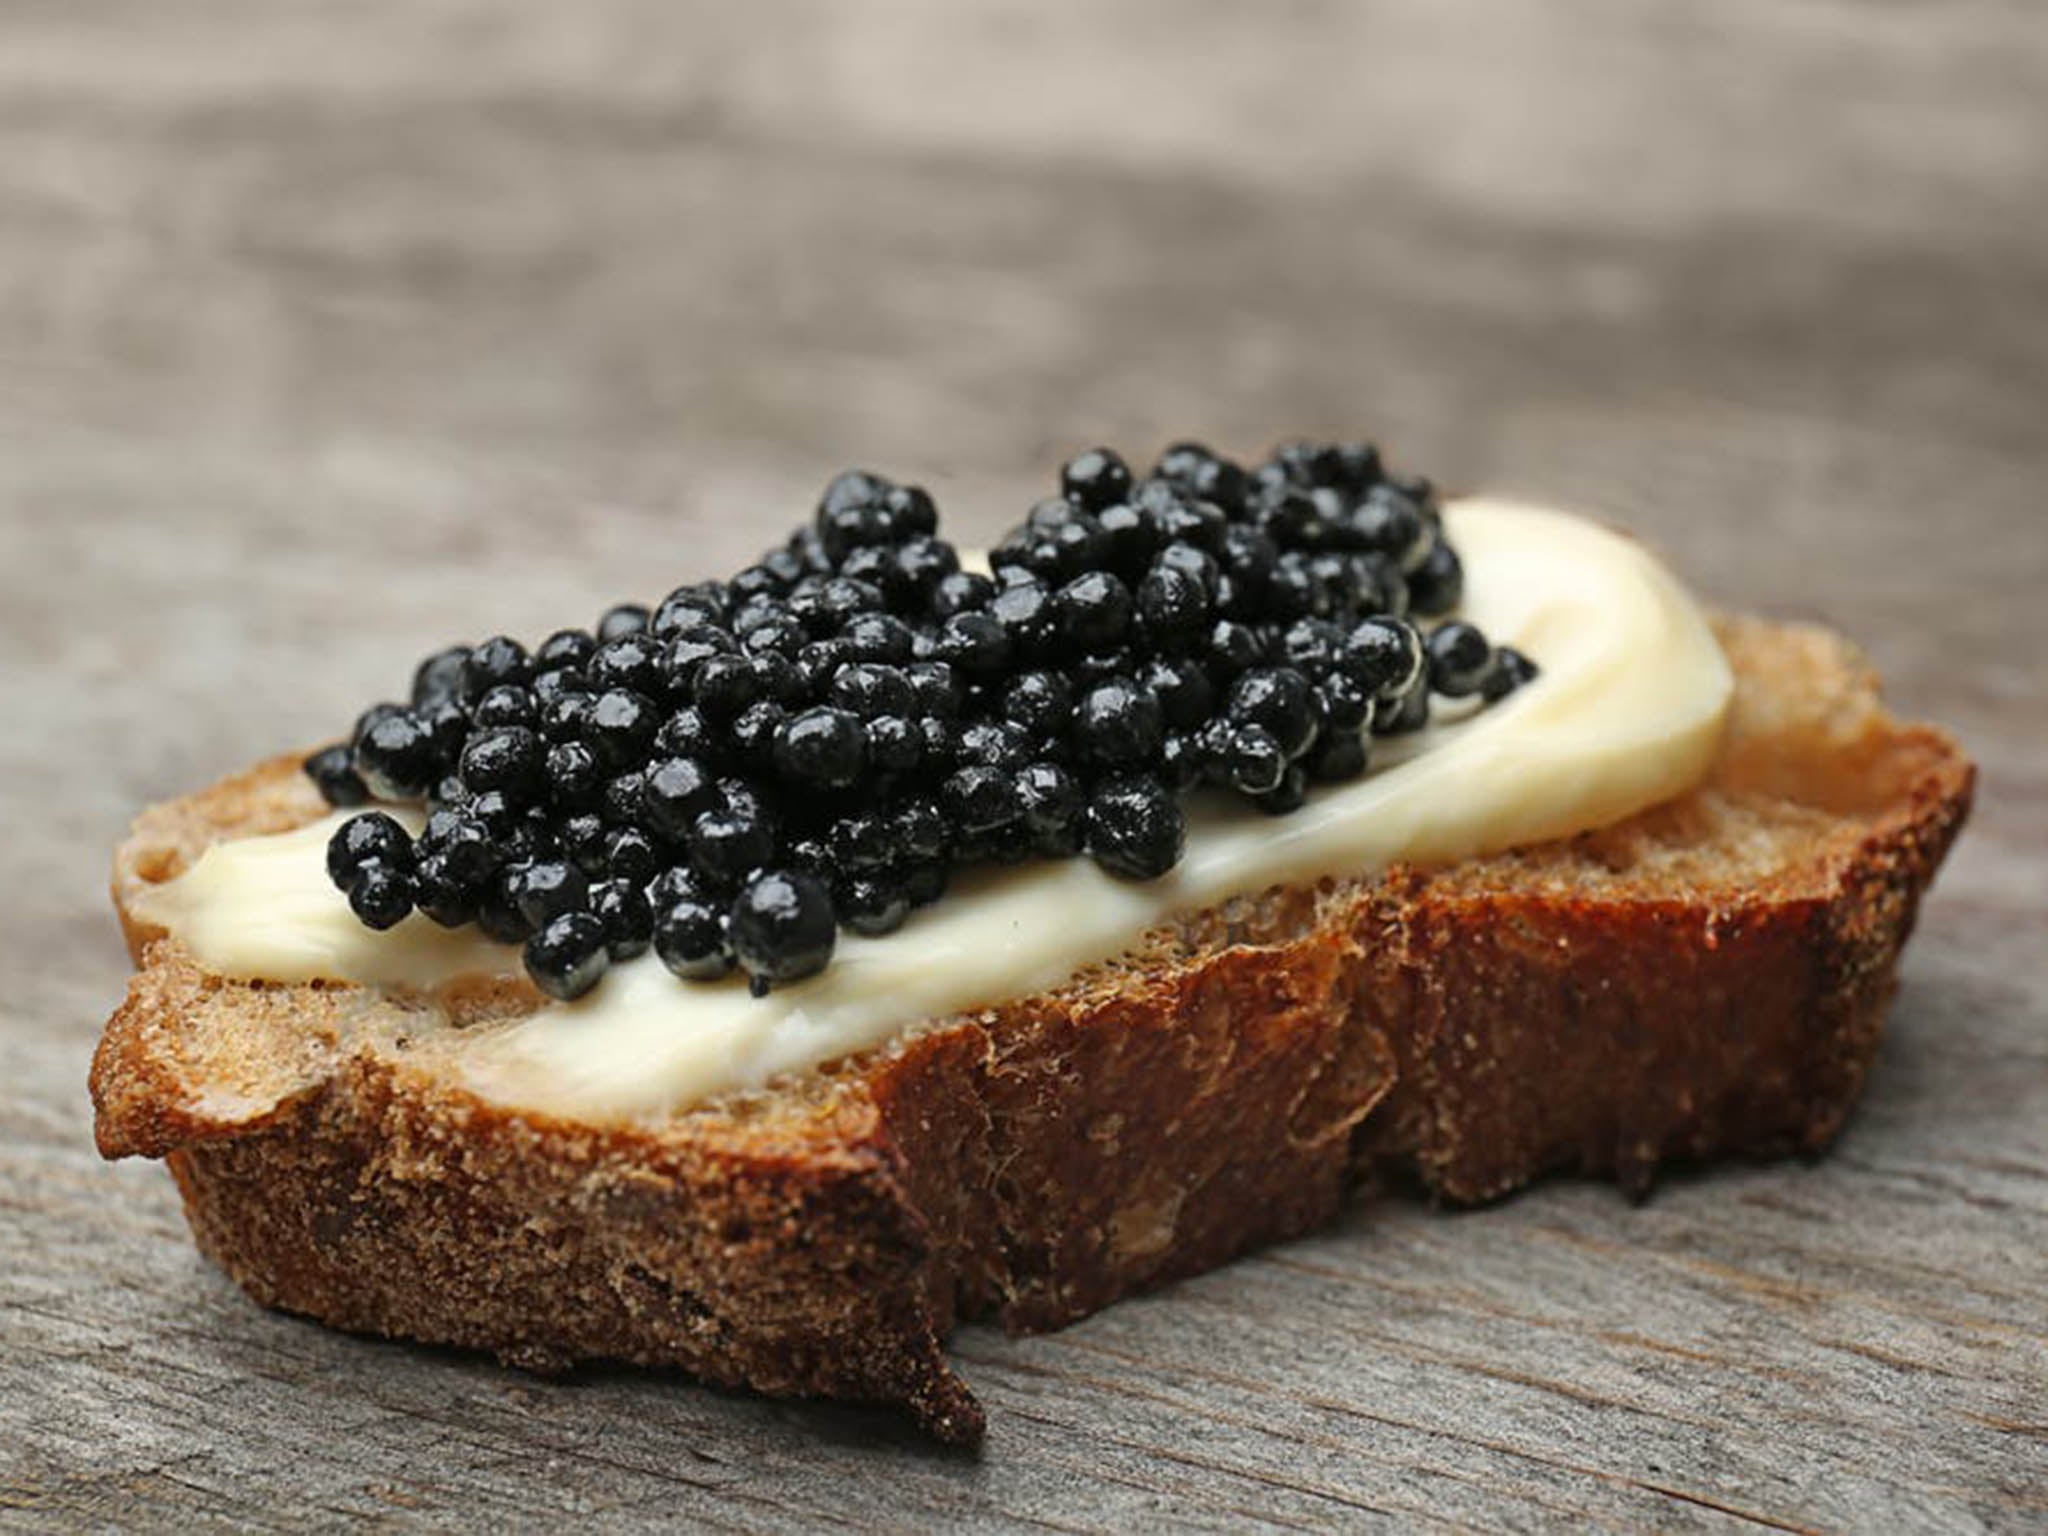 How a Russian power plant almost wiped out the world's finest caviar fish |  The Independent